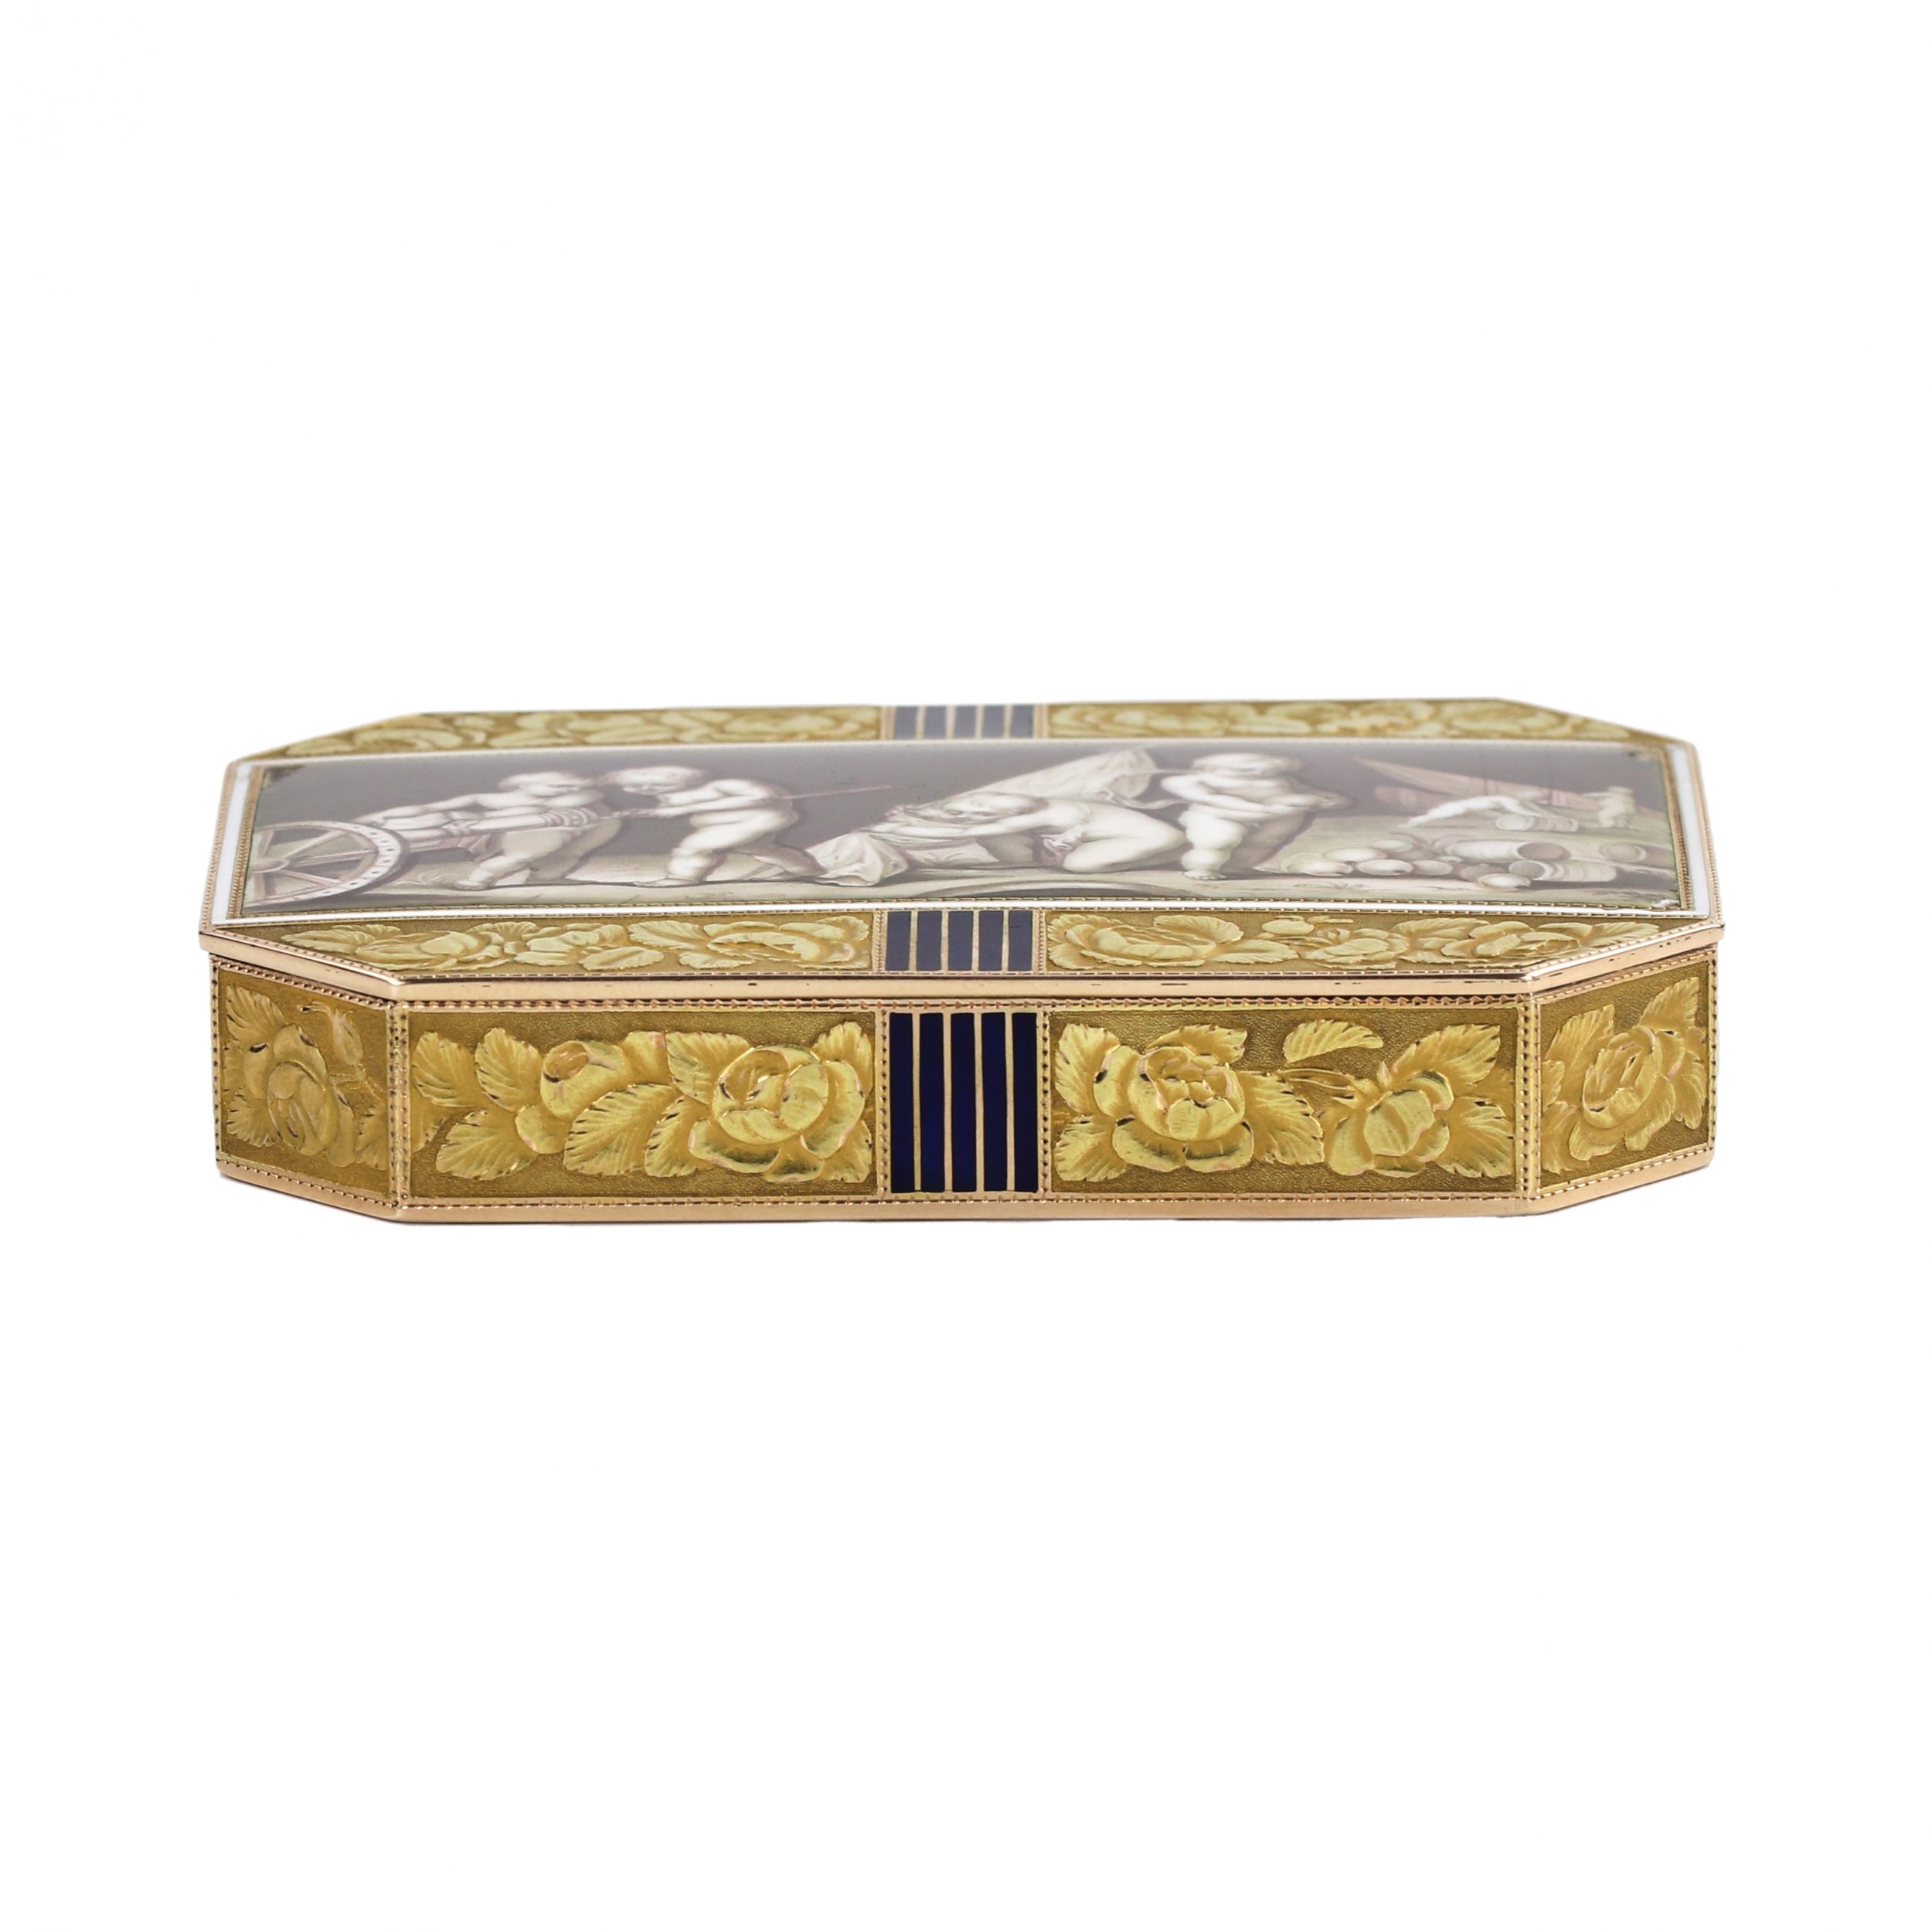 Golden, French snuffbox with enamel grisaille, Empire period. - Image 2 of 9